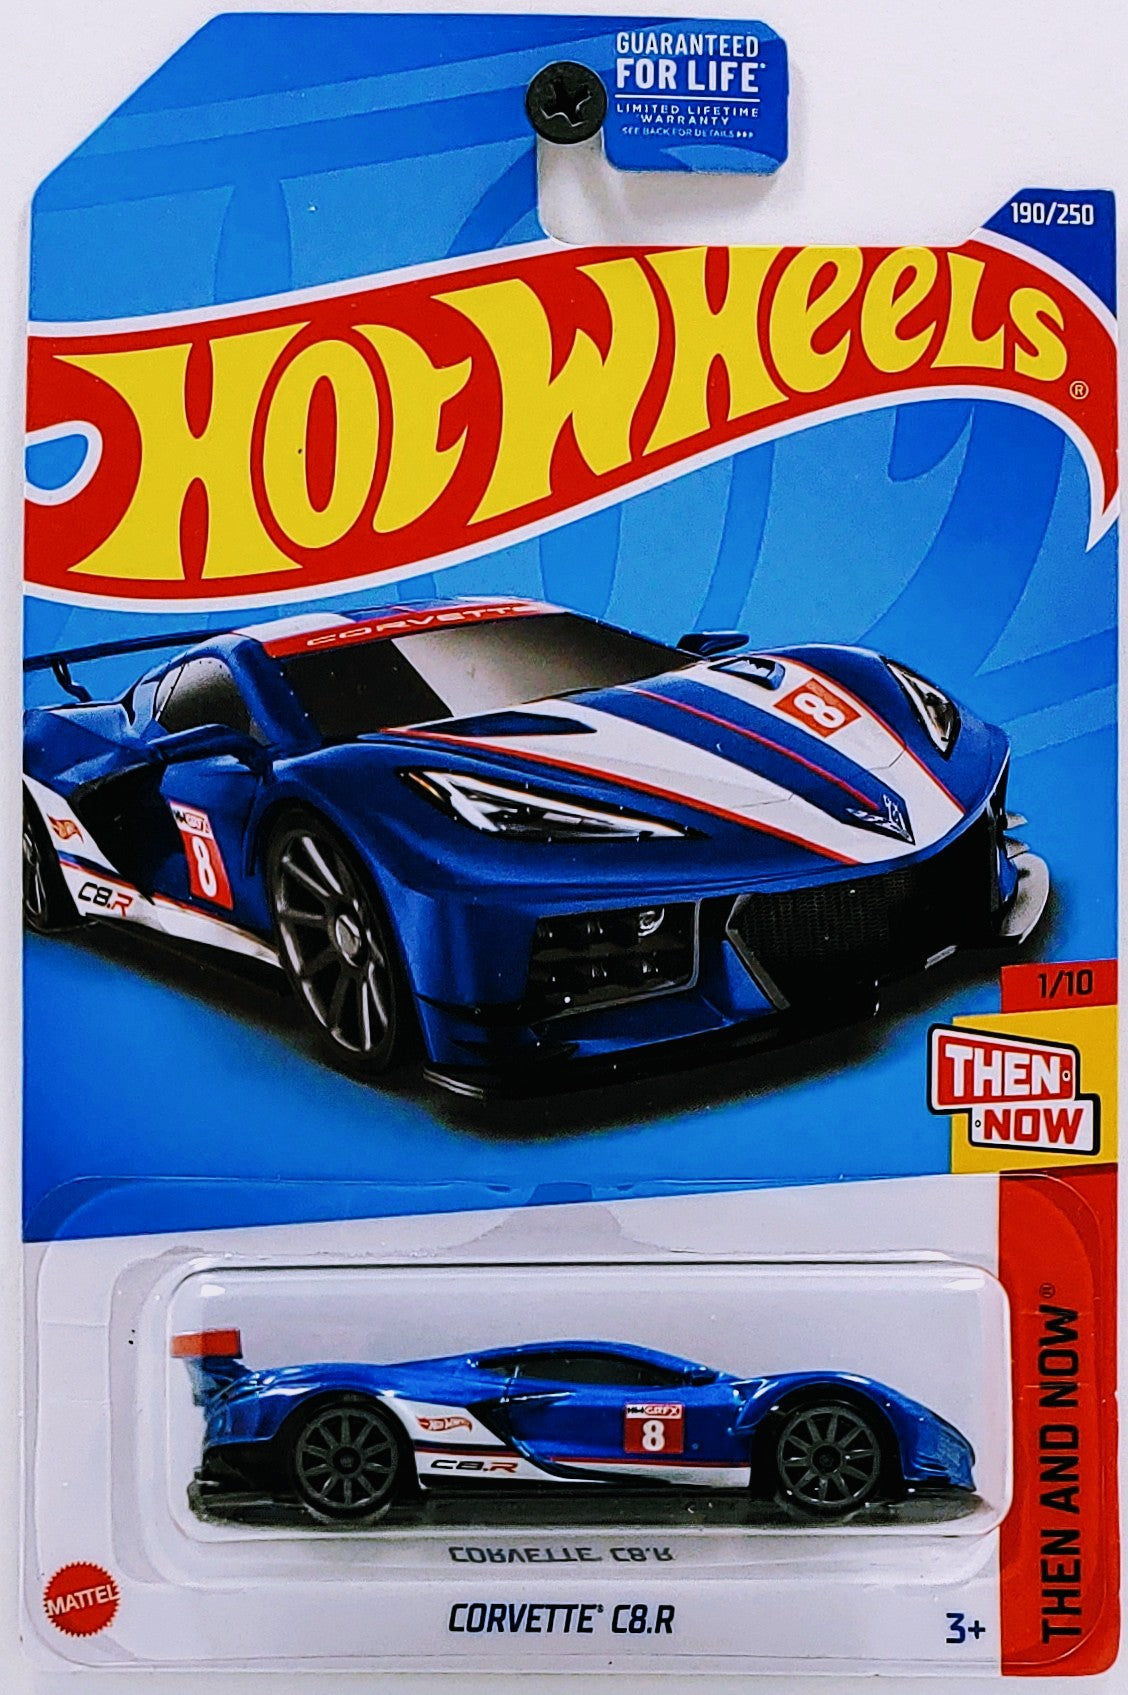 Hot Wheels 2022 - Collector # 190/250 - Then And Now 1/10 - Corvette C8.R - Blue - 10 Spokes